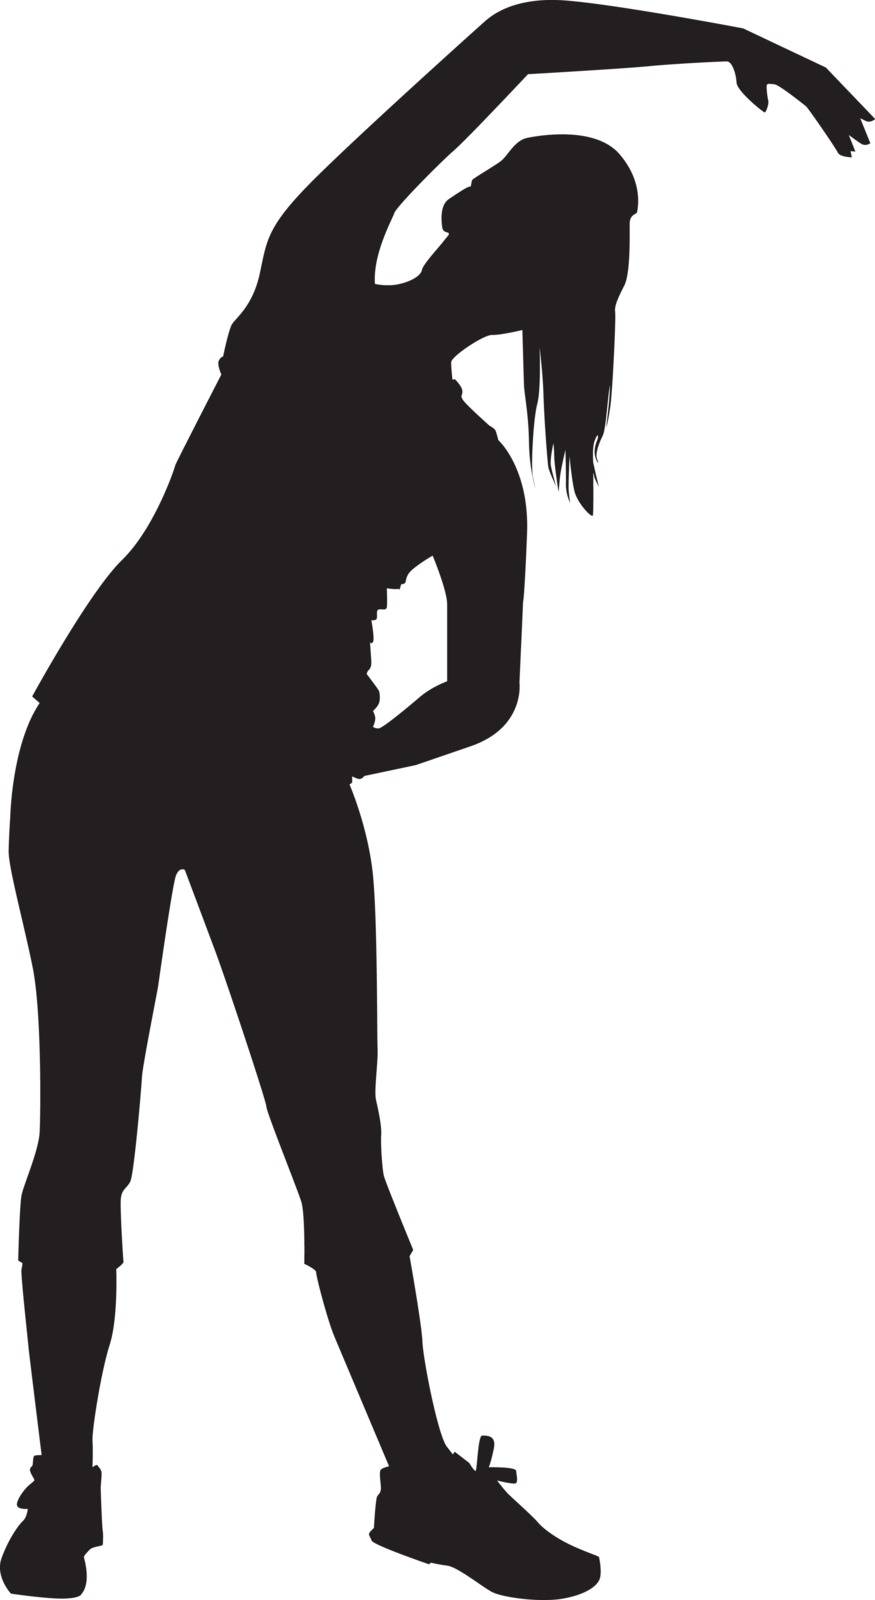 Silhouette of a woman how stretches out , illustration, vector on white background.